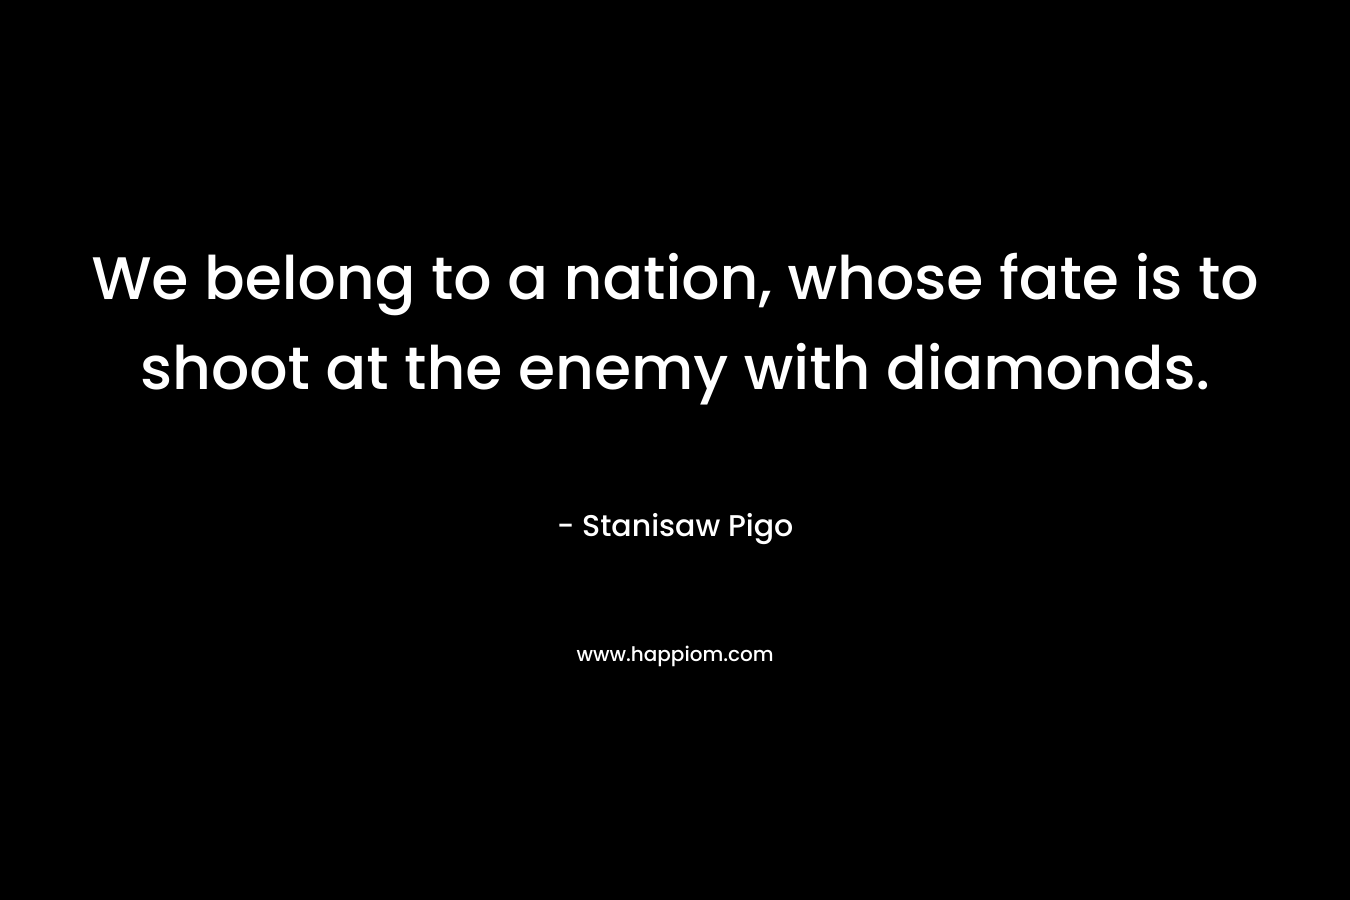 We belong to a nation, whose fate is to shoot at the enemy with diamonds. – Stanisaw Pigo